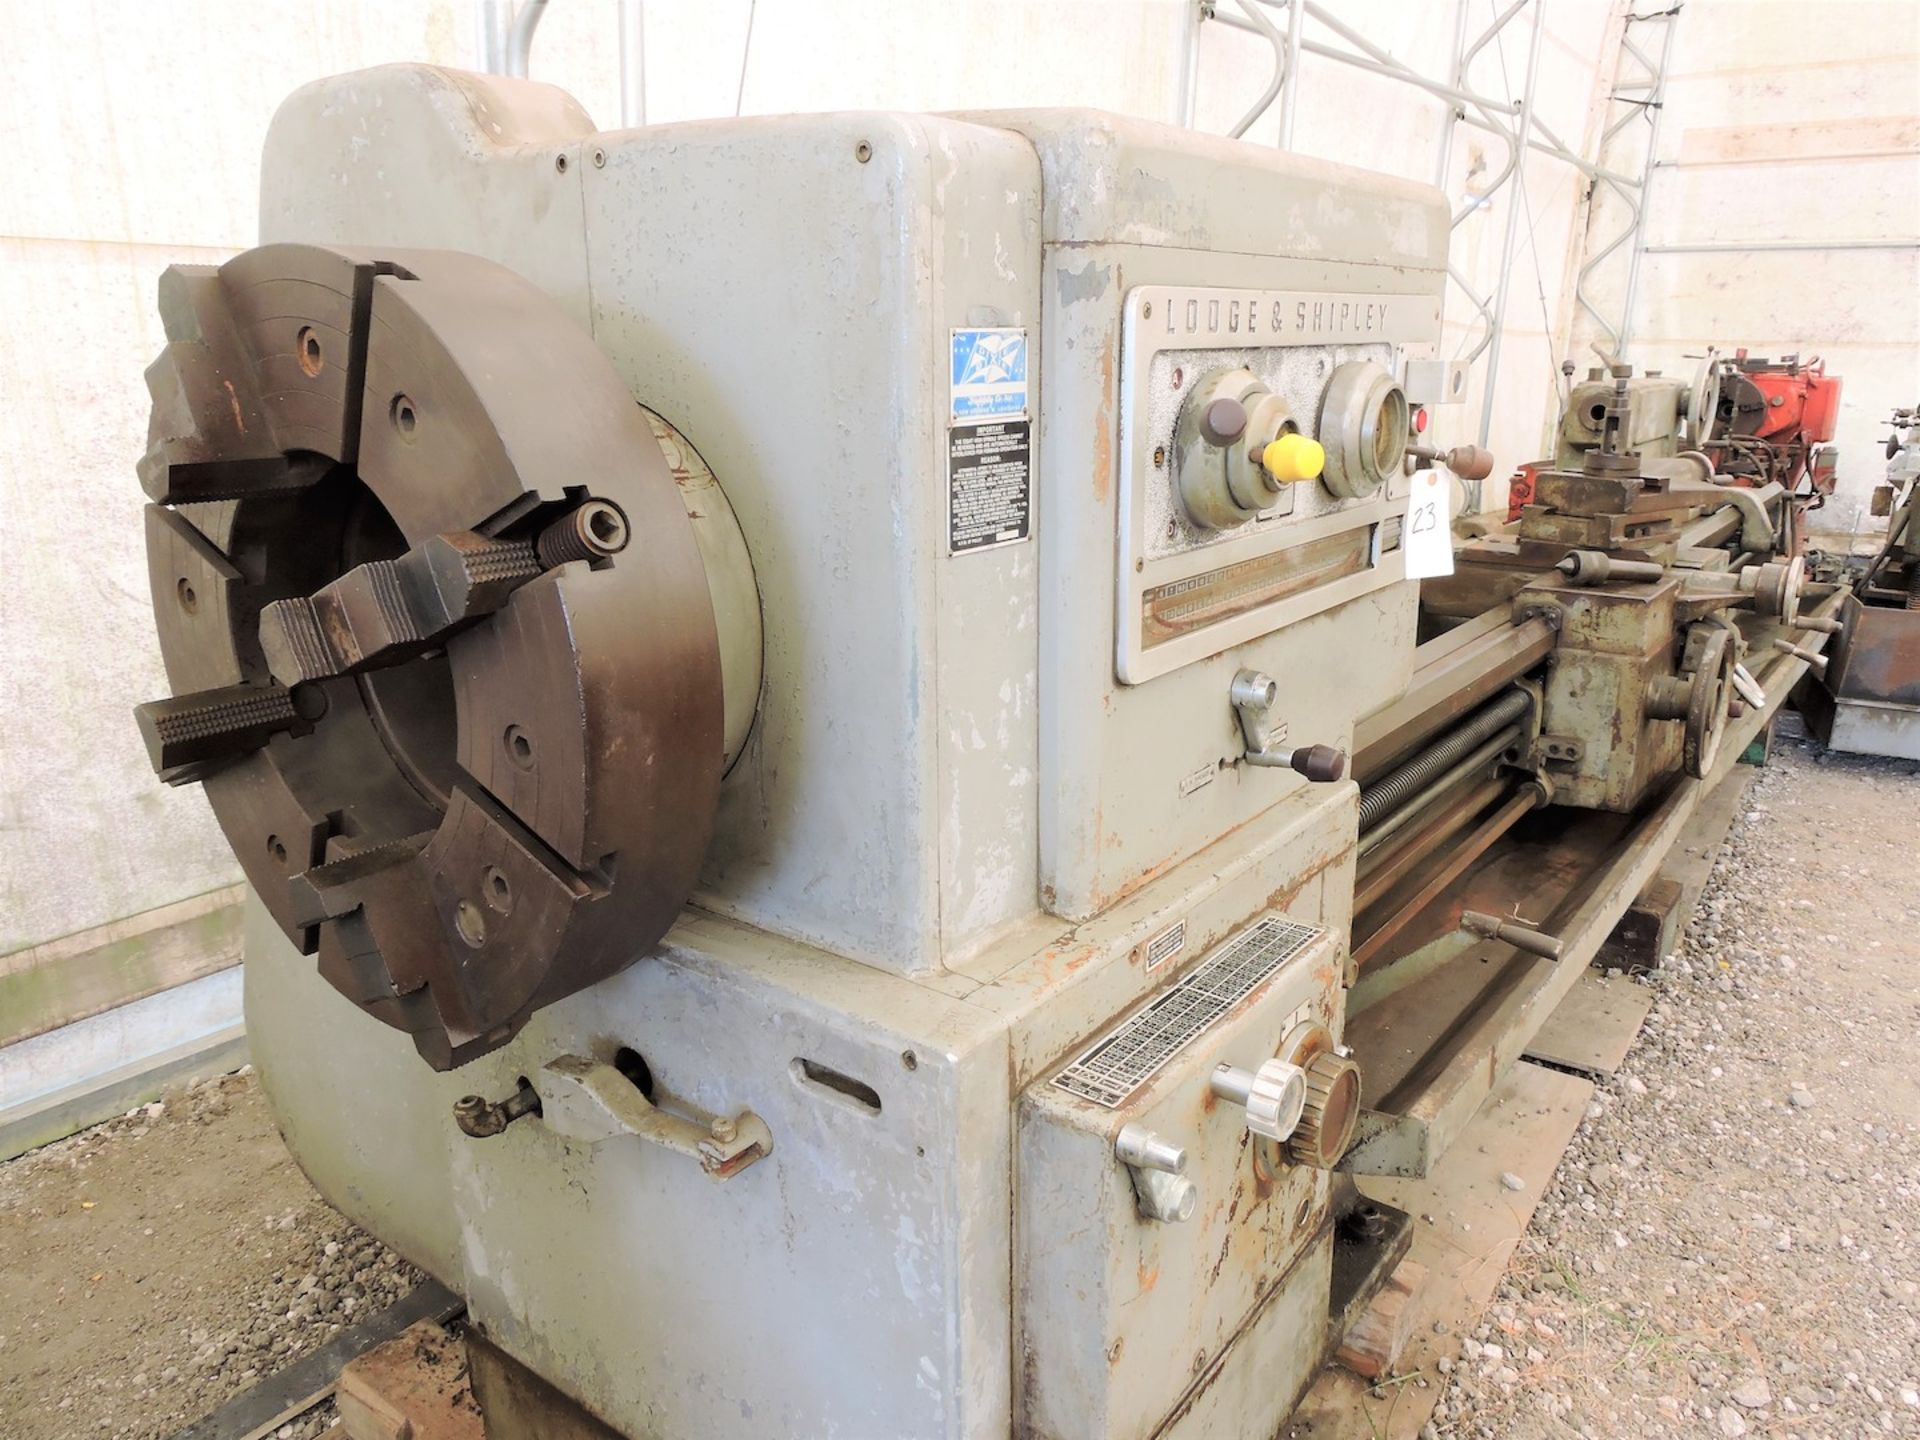 LODGE & SHIPLEY 30" X 120" MODEL 2516 BIG BORE ENGINE LATHE: S/N 46225 (1965); OIL COUNTRY; FRONT